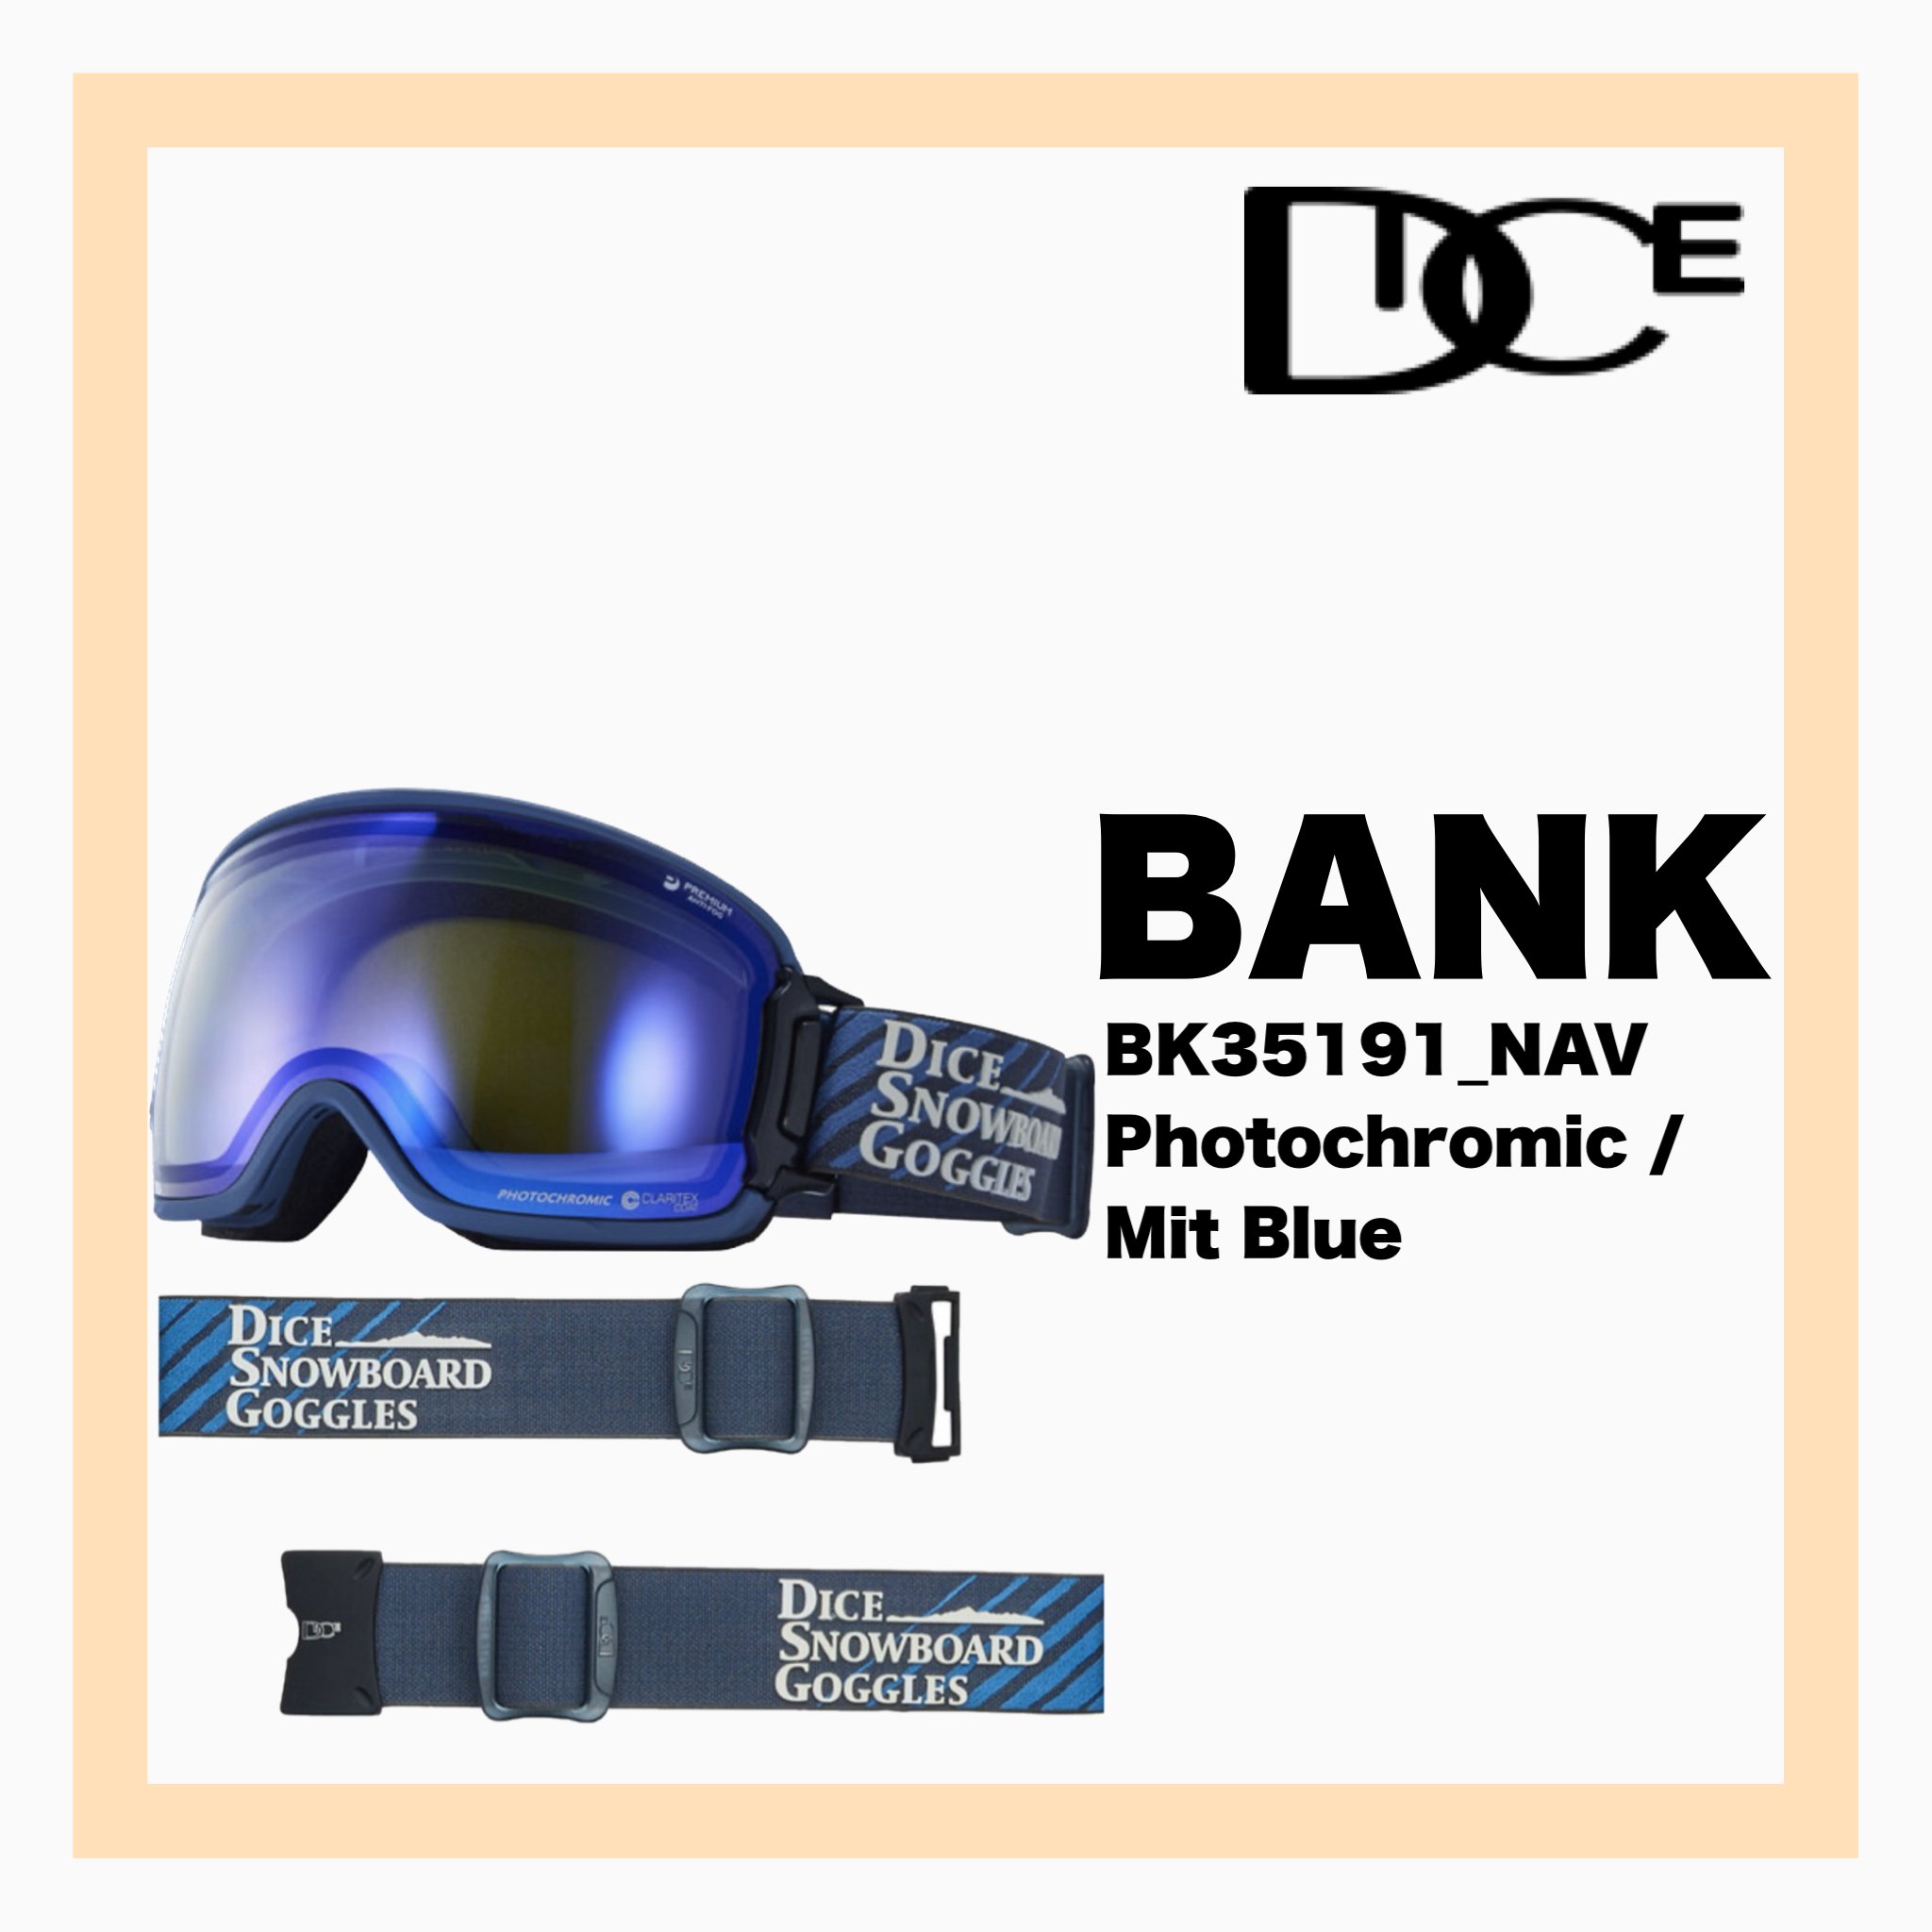 <img class='new_mark_img1' src='https://img.shop-pro.jp/img/new/icons34.gif' style='border:none;display:inline;margin:0px;padding:0px;width:auto;' />DICE BANK NAV  Photochromic / Mit Blue